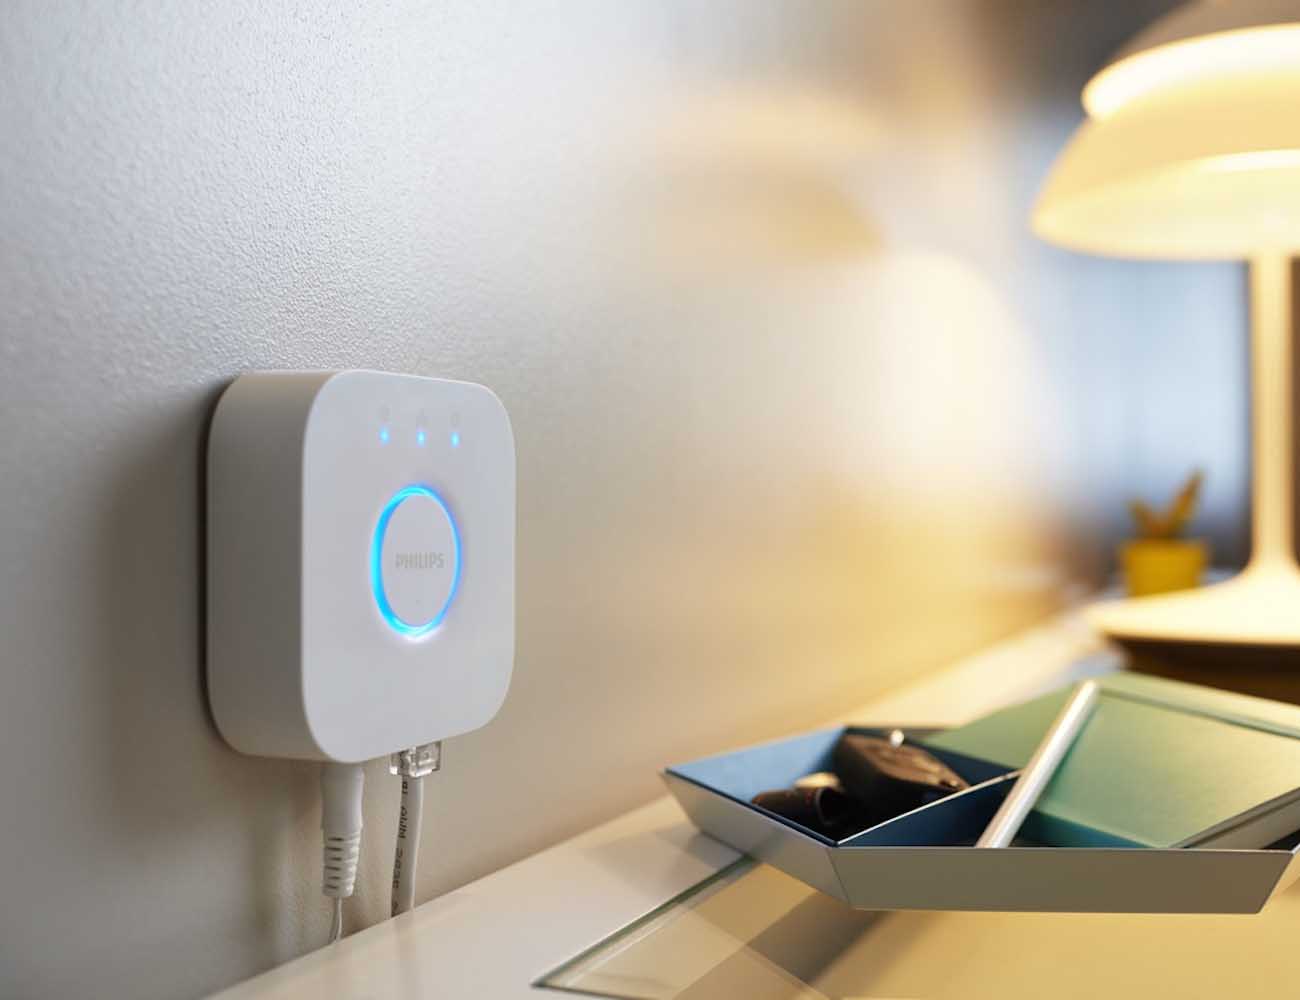 Philips Hue Bridge smart home hub is Matter compatible, integrating with other brands